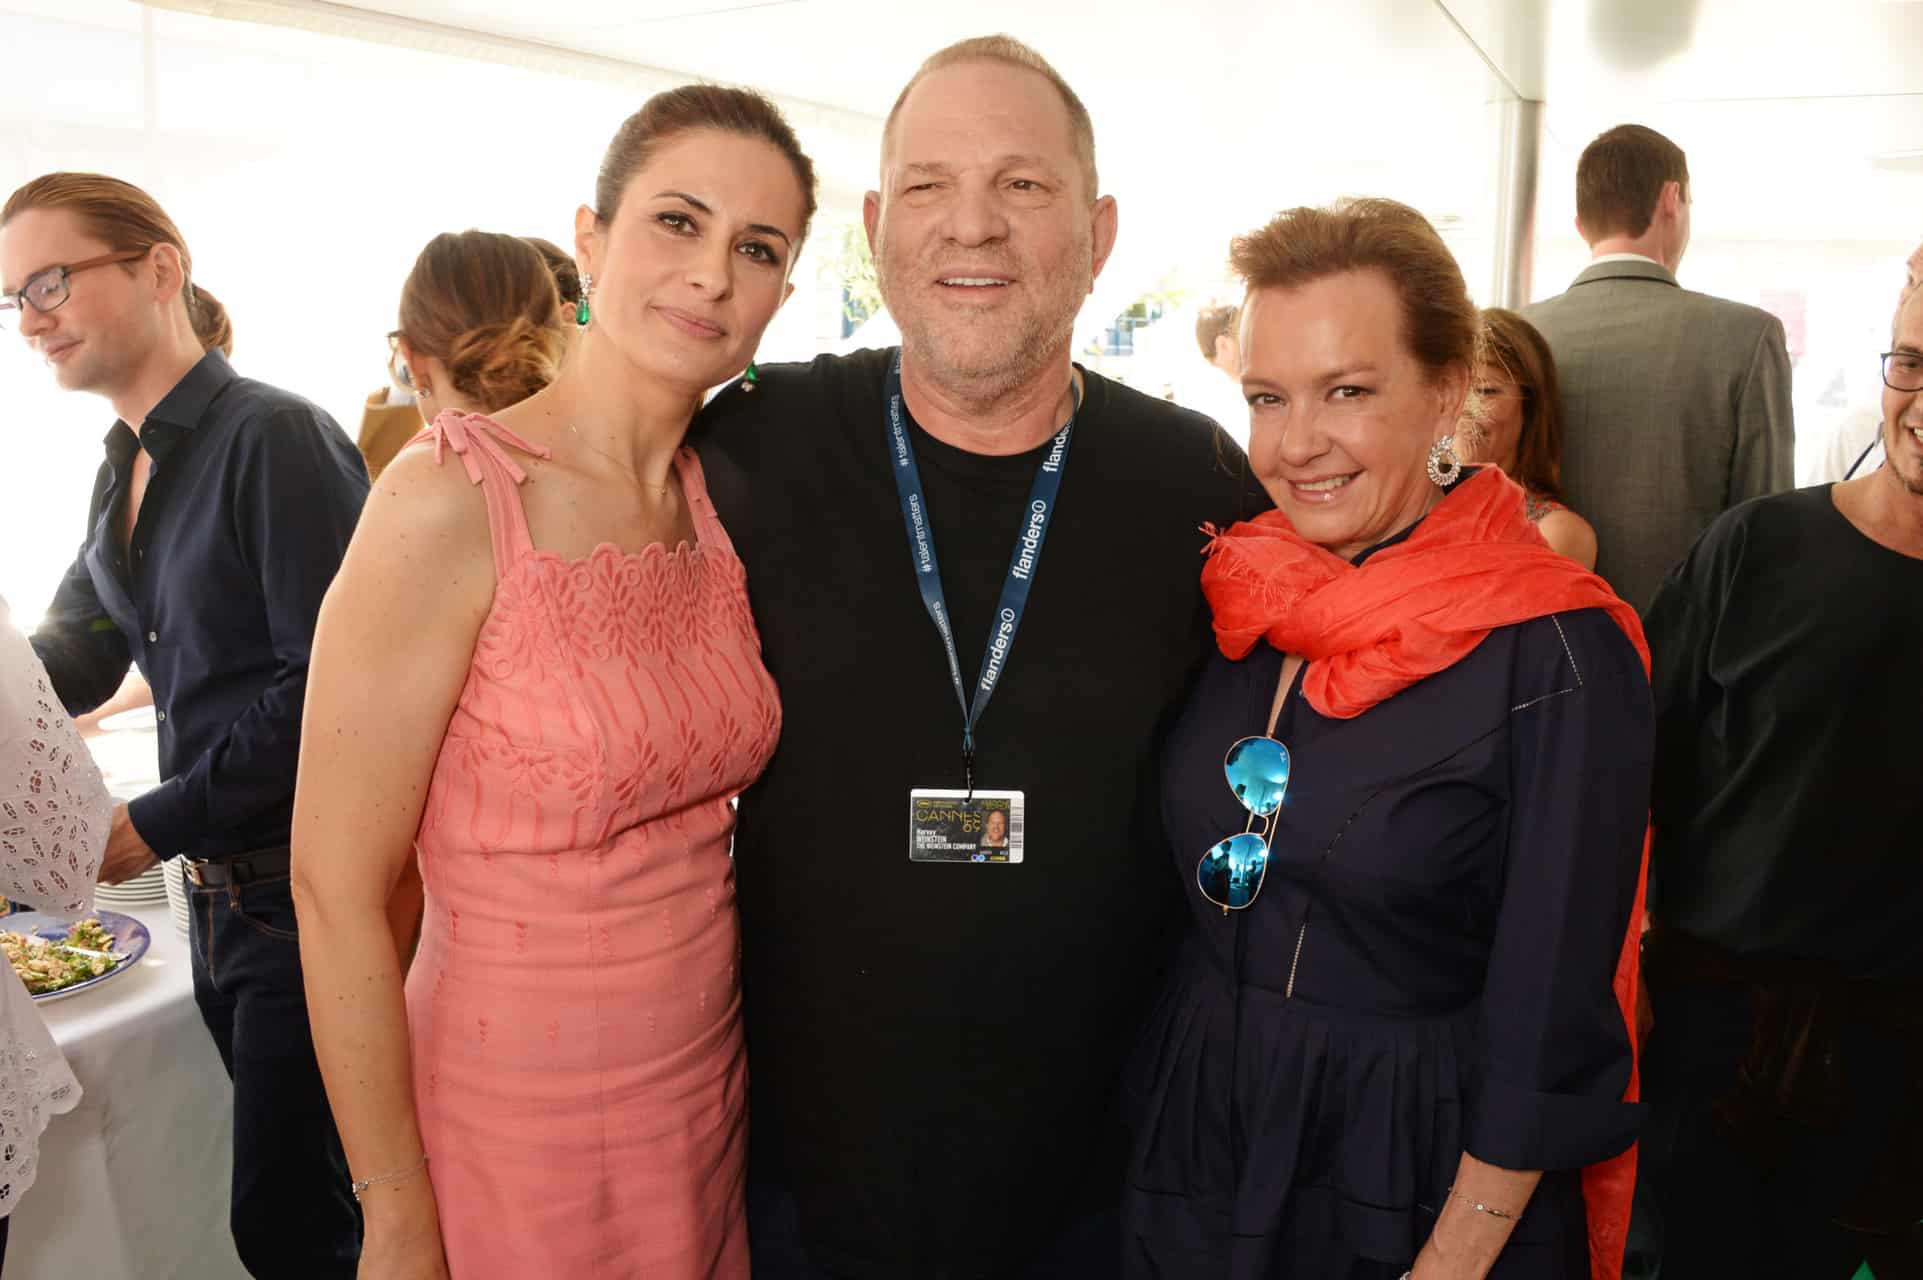 CANNES, FRANCE - MAY 14:  (L to R) Livia Firth, Harvey Weinstein and Caroline Scheufele, Artistic Director and Co-President of Chopard, attend a private lunch hosted by Colin Firth, Livia Firth and Chopard to celebrate the journey to sustainable luxury during the Cannes Film Festival 2016 aboard The Silver Reel on May 14, 2016 in Cannes, France.   Photo Credit: Dave Benett